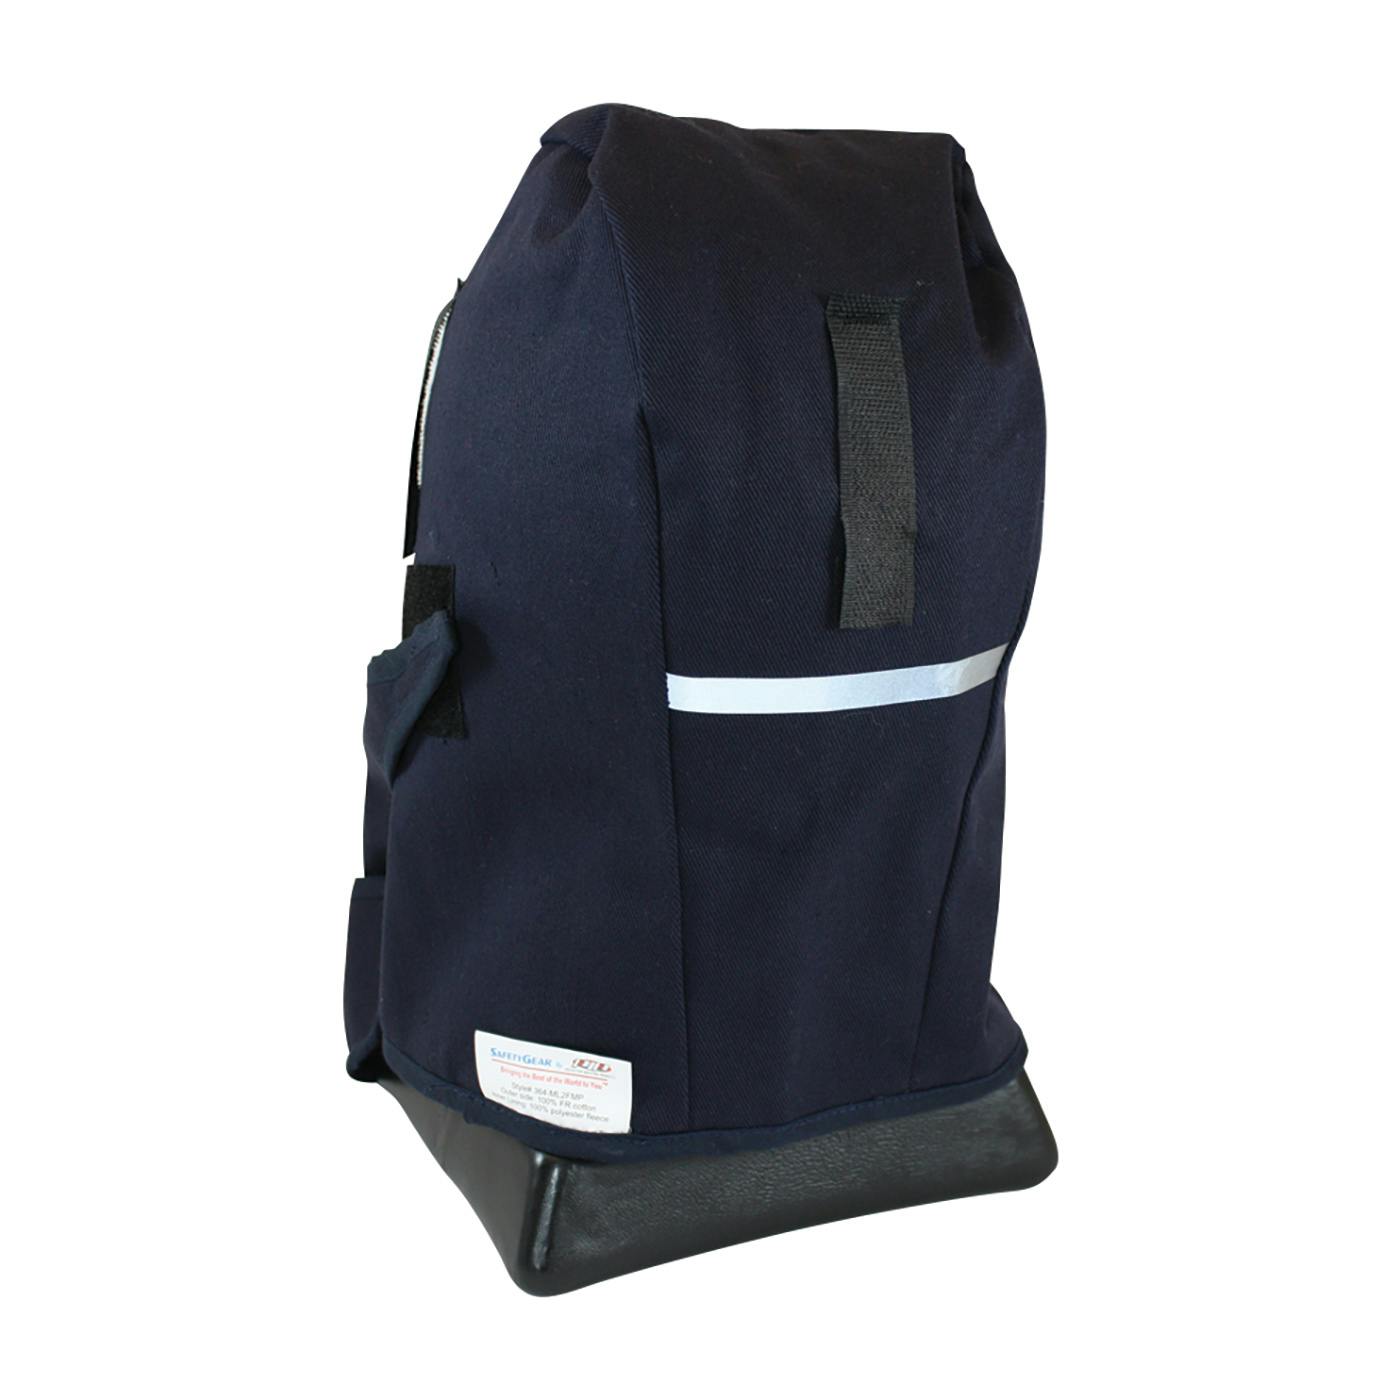 2-Layer Cotton Twill / Fleece Winter Liner with Mouthpiece and FR Treated Outer Shell - Mid Length, Navy (364-ML2FMP) - OS